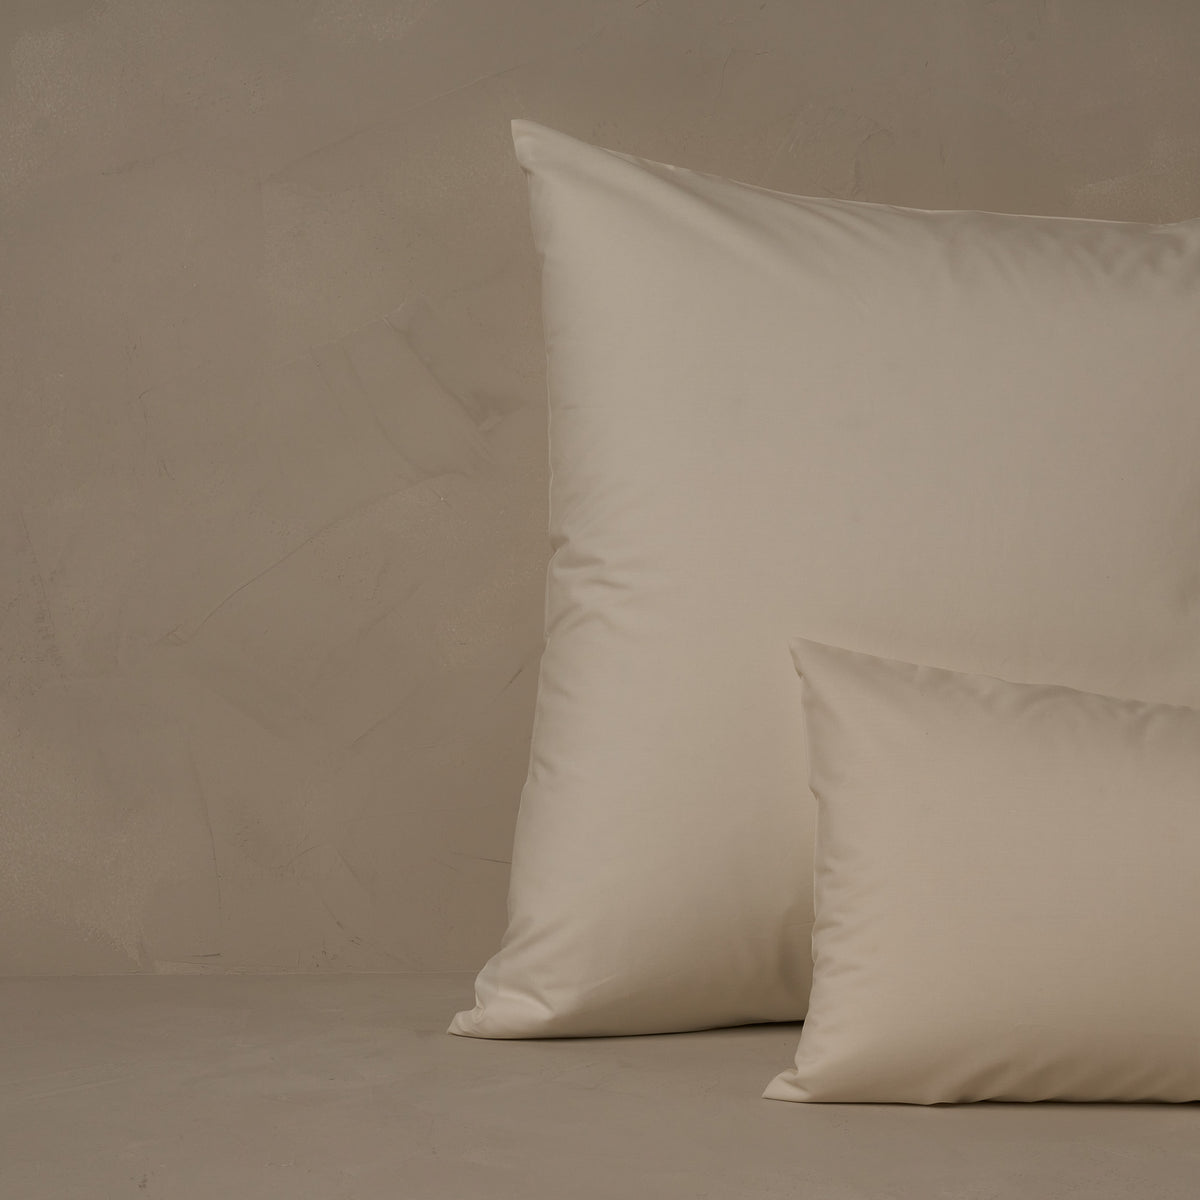 An image of a small boudoir or travel size pillow stacked in front of a large euro size pillow. The pillow cases are made of LETTO's crisp and cool Classic Cotton Percale in color ivory. data-image-id=